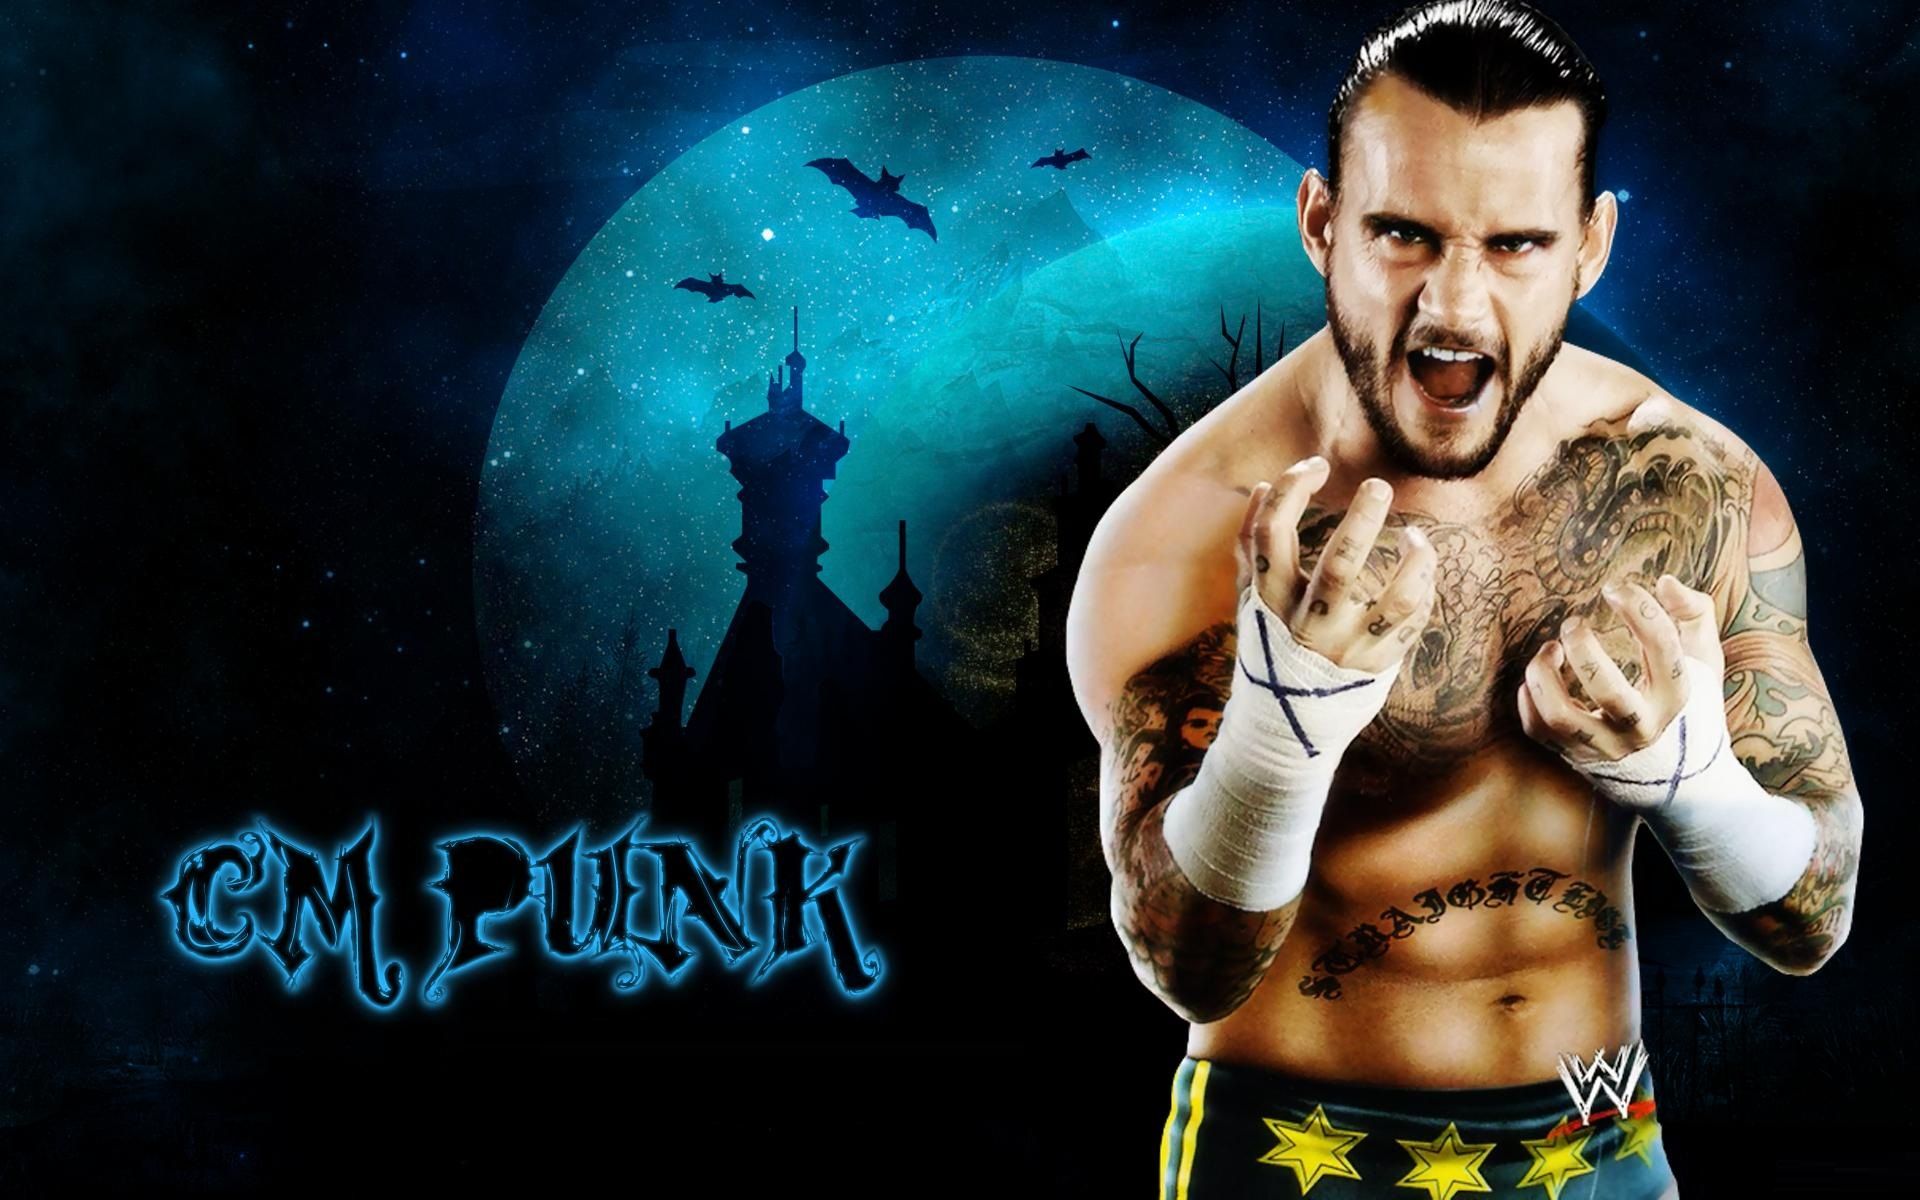 Free download WWE Cm Punk Wallpapers 2015 [1920x1200] for your Desktop